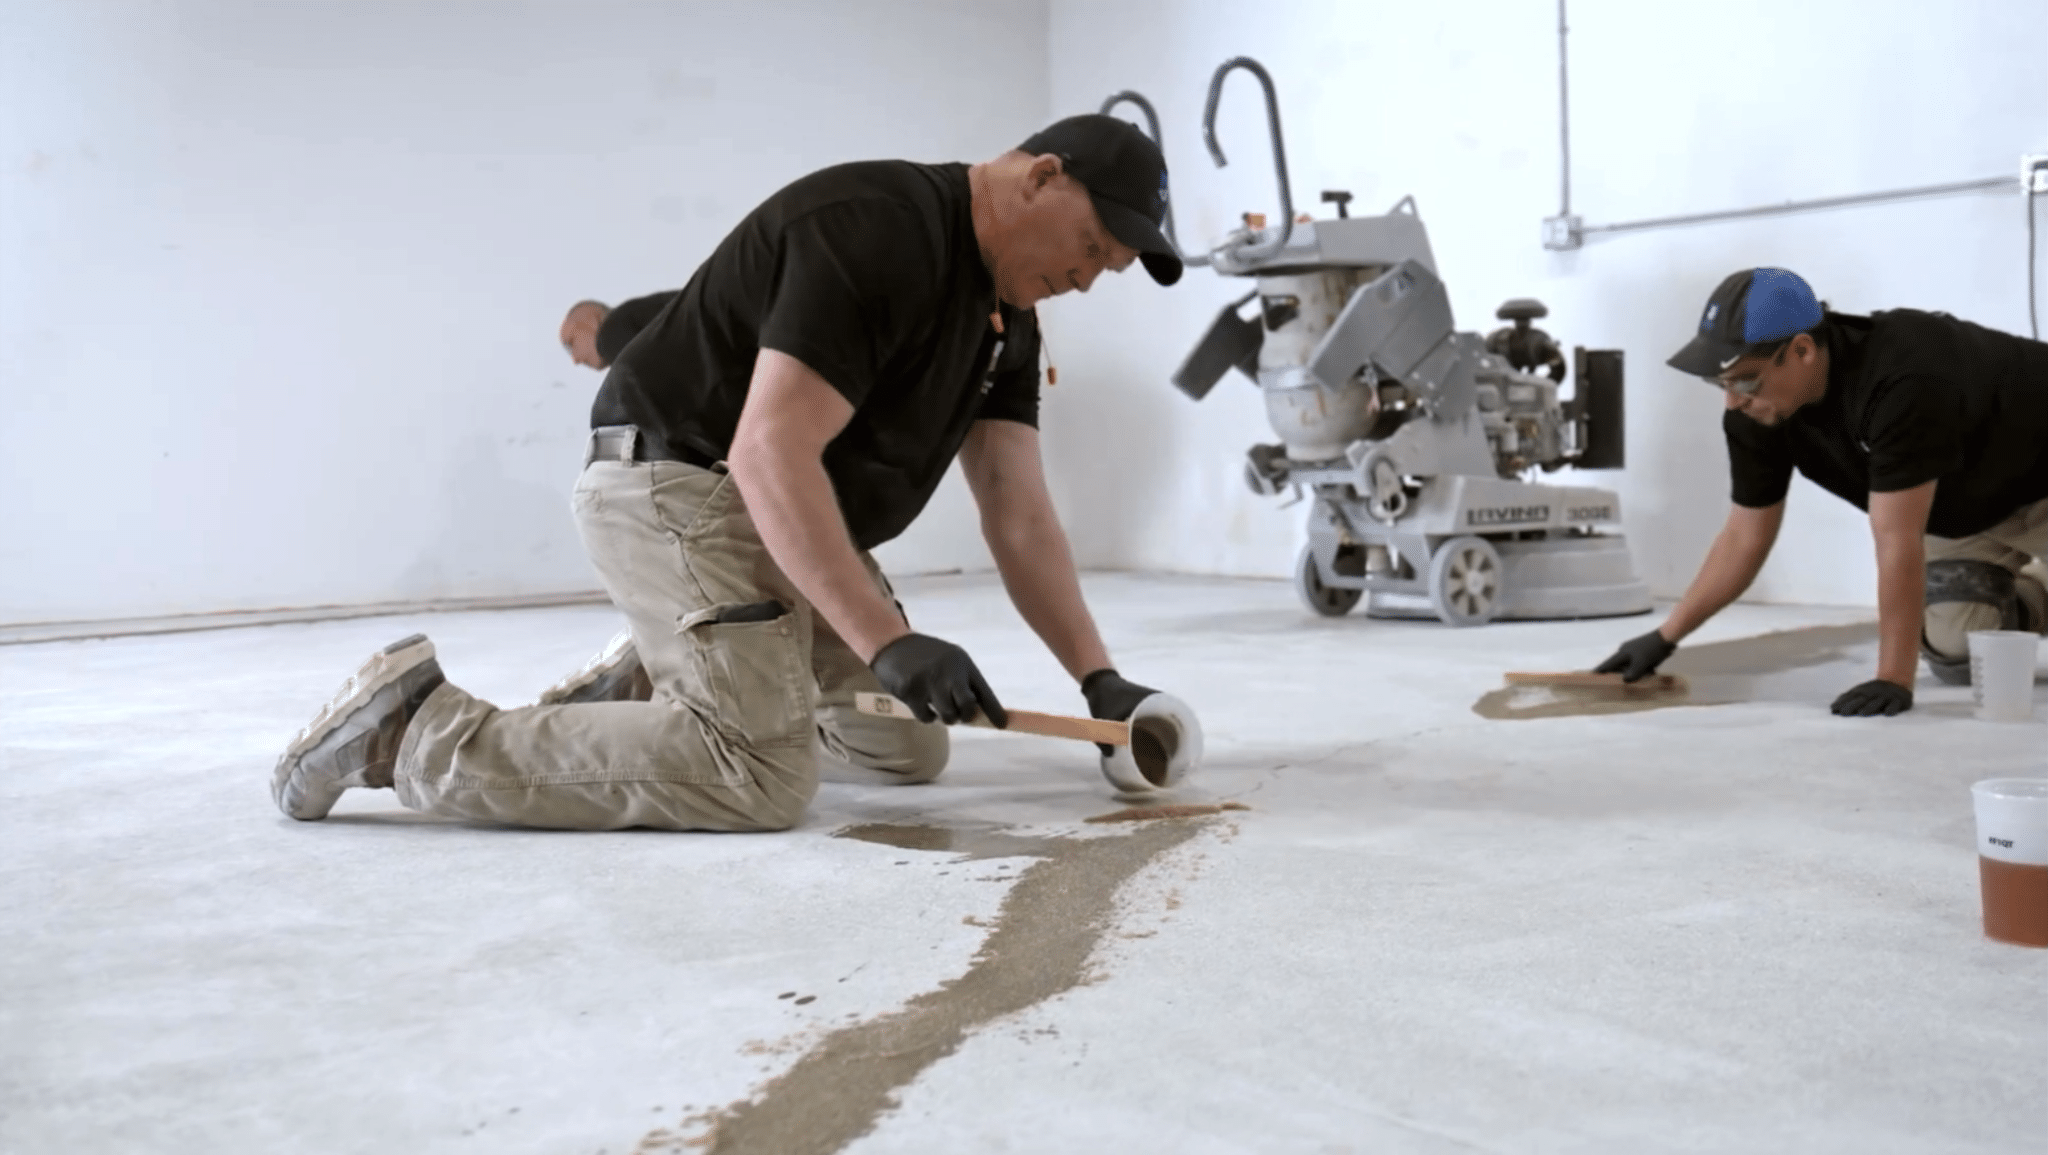 Two people are working on a concrete floor, one applying tape and another spreading a compound. Construction equipment is visible in the background.